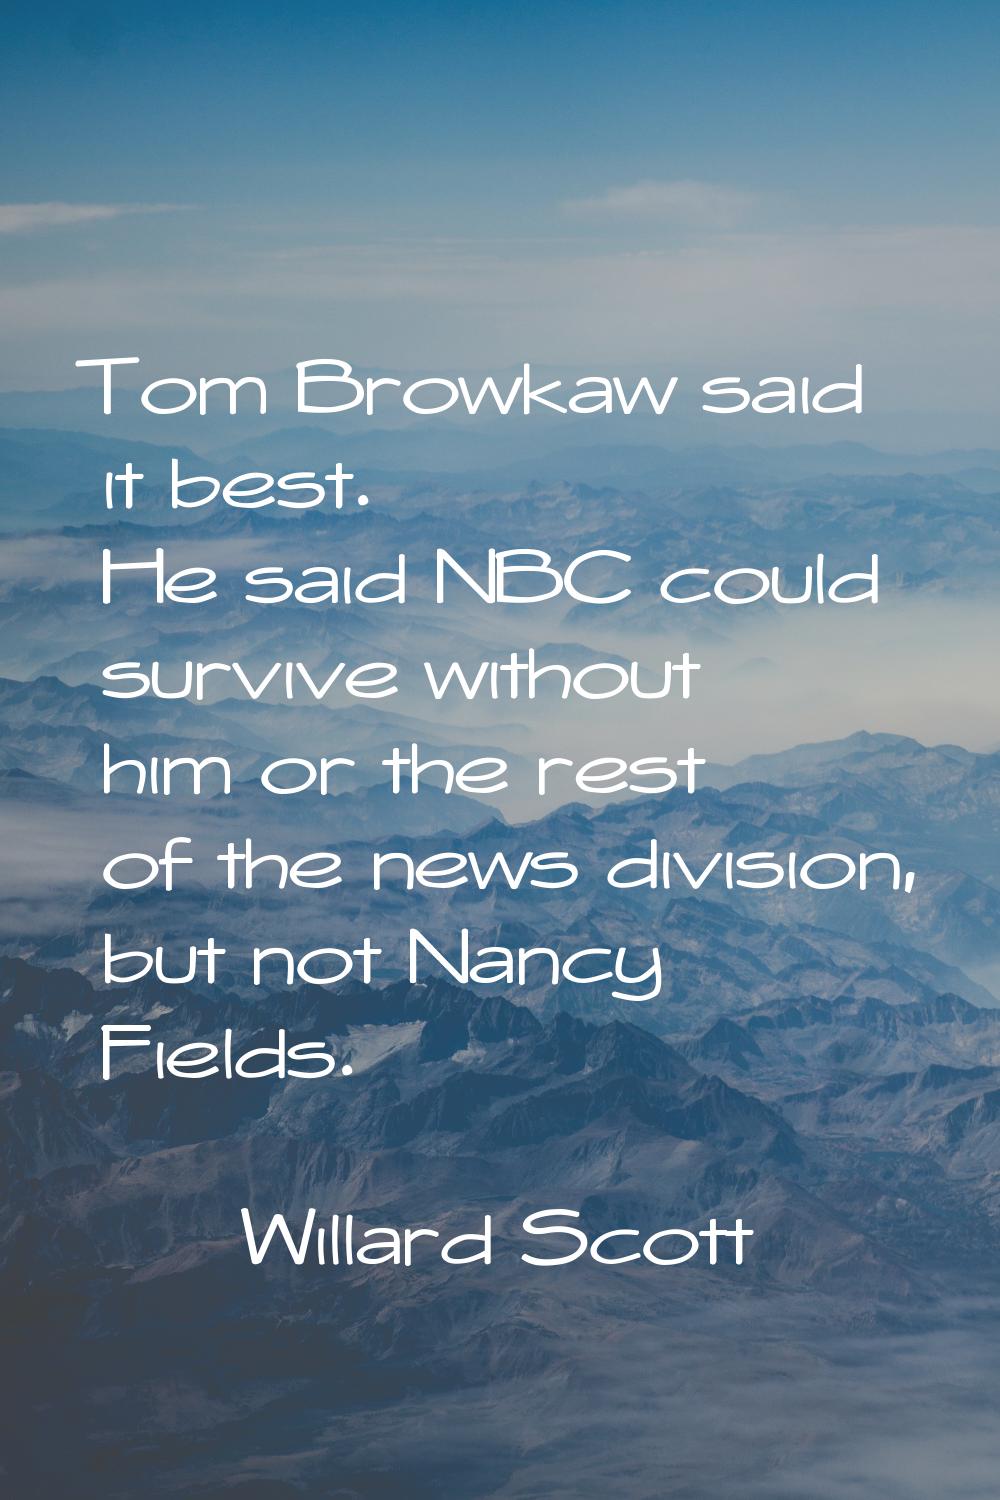 Tom Browkaw said it best. He said NBC could survive without him or the rest of the news division, b